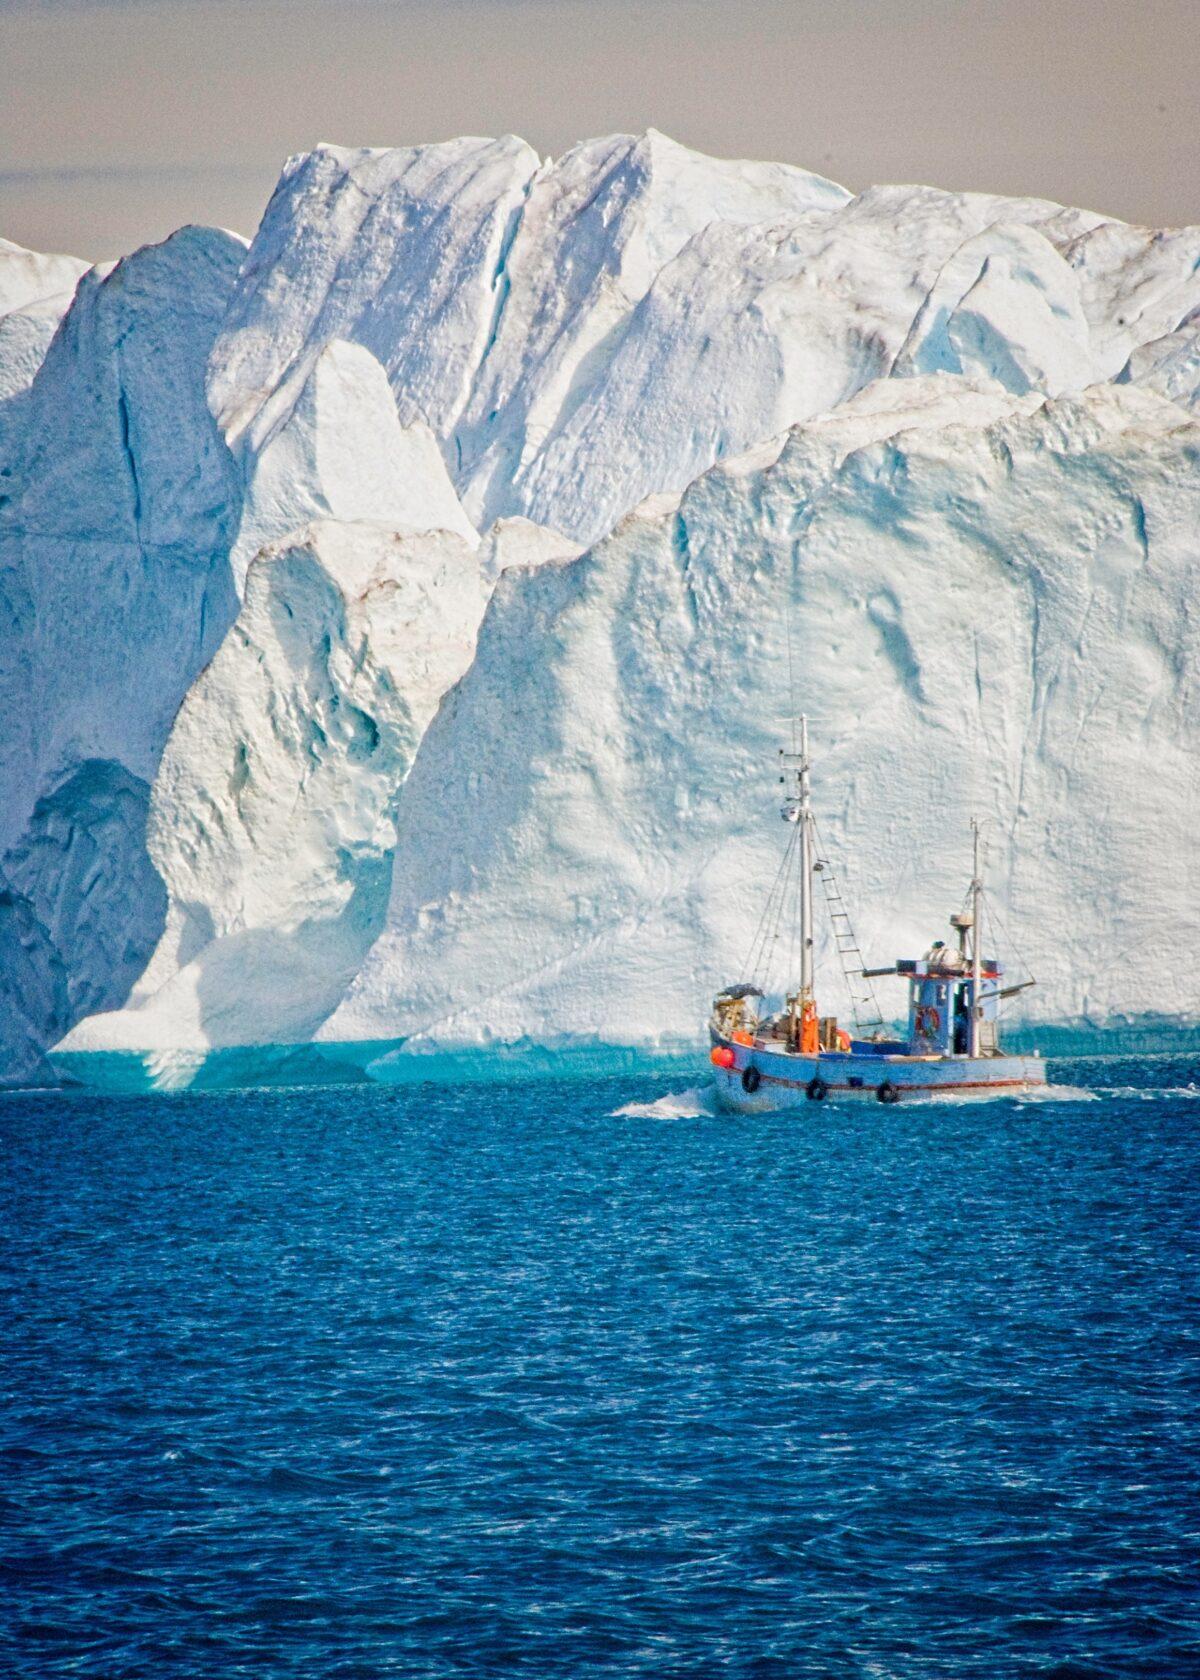 This fishing boat in Disko Bay will deliver its catch to a good-sized plant for processing shrimp and halibut in Ilulissat. (Copyright Fred J. Eckert)